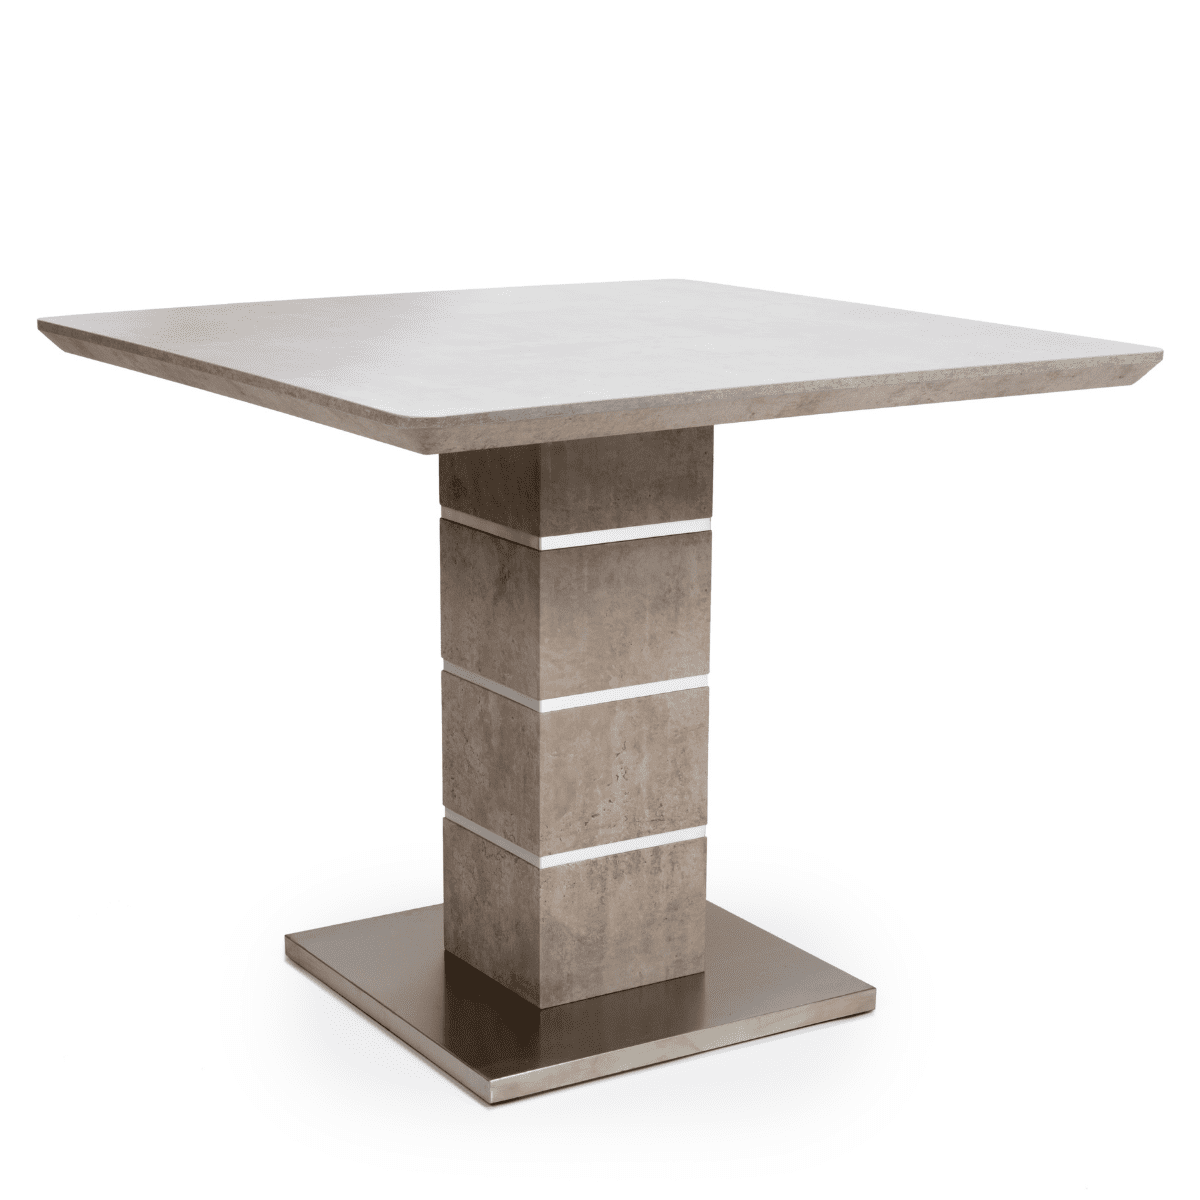 Denny Square Concrete Effect Dining Table